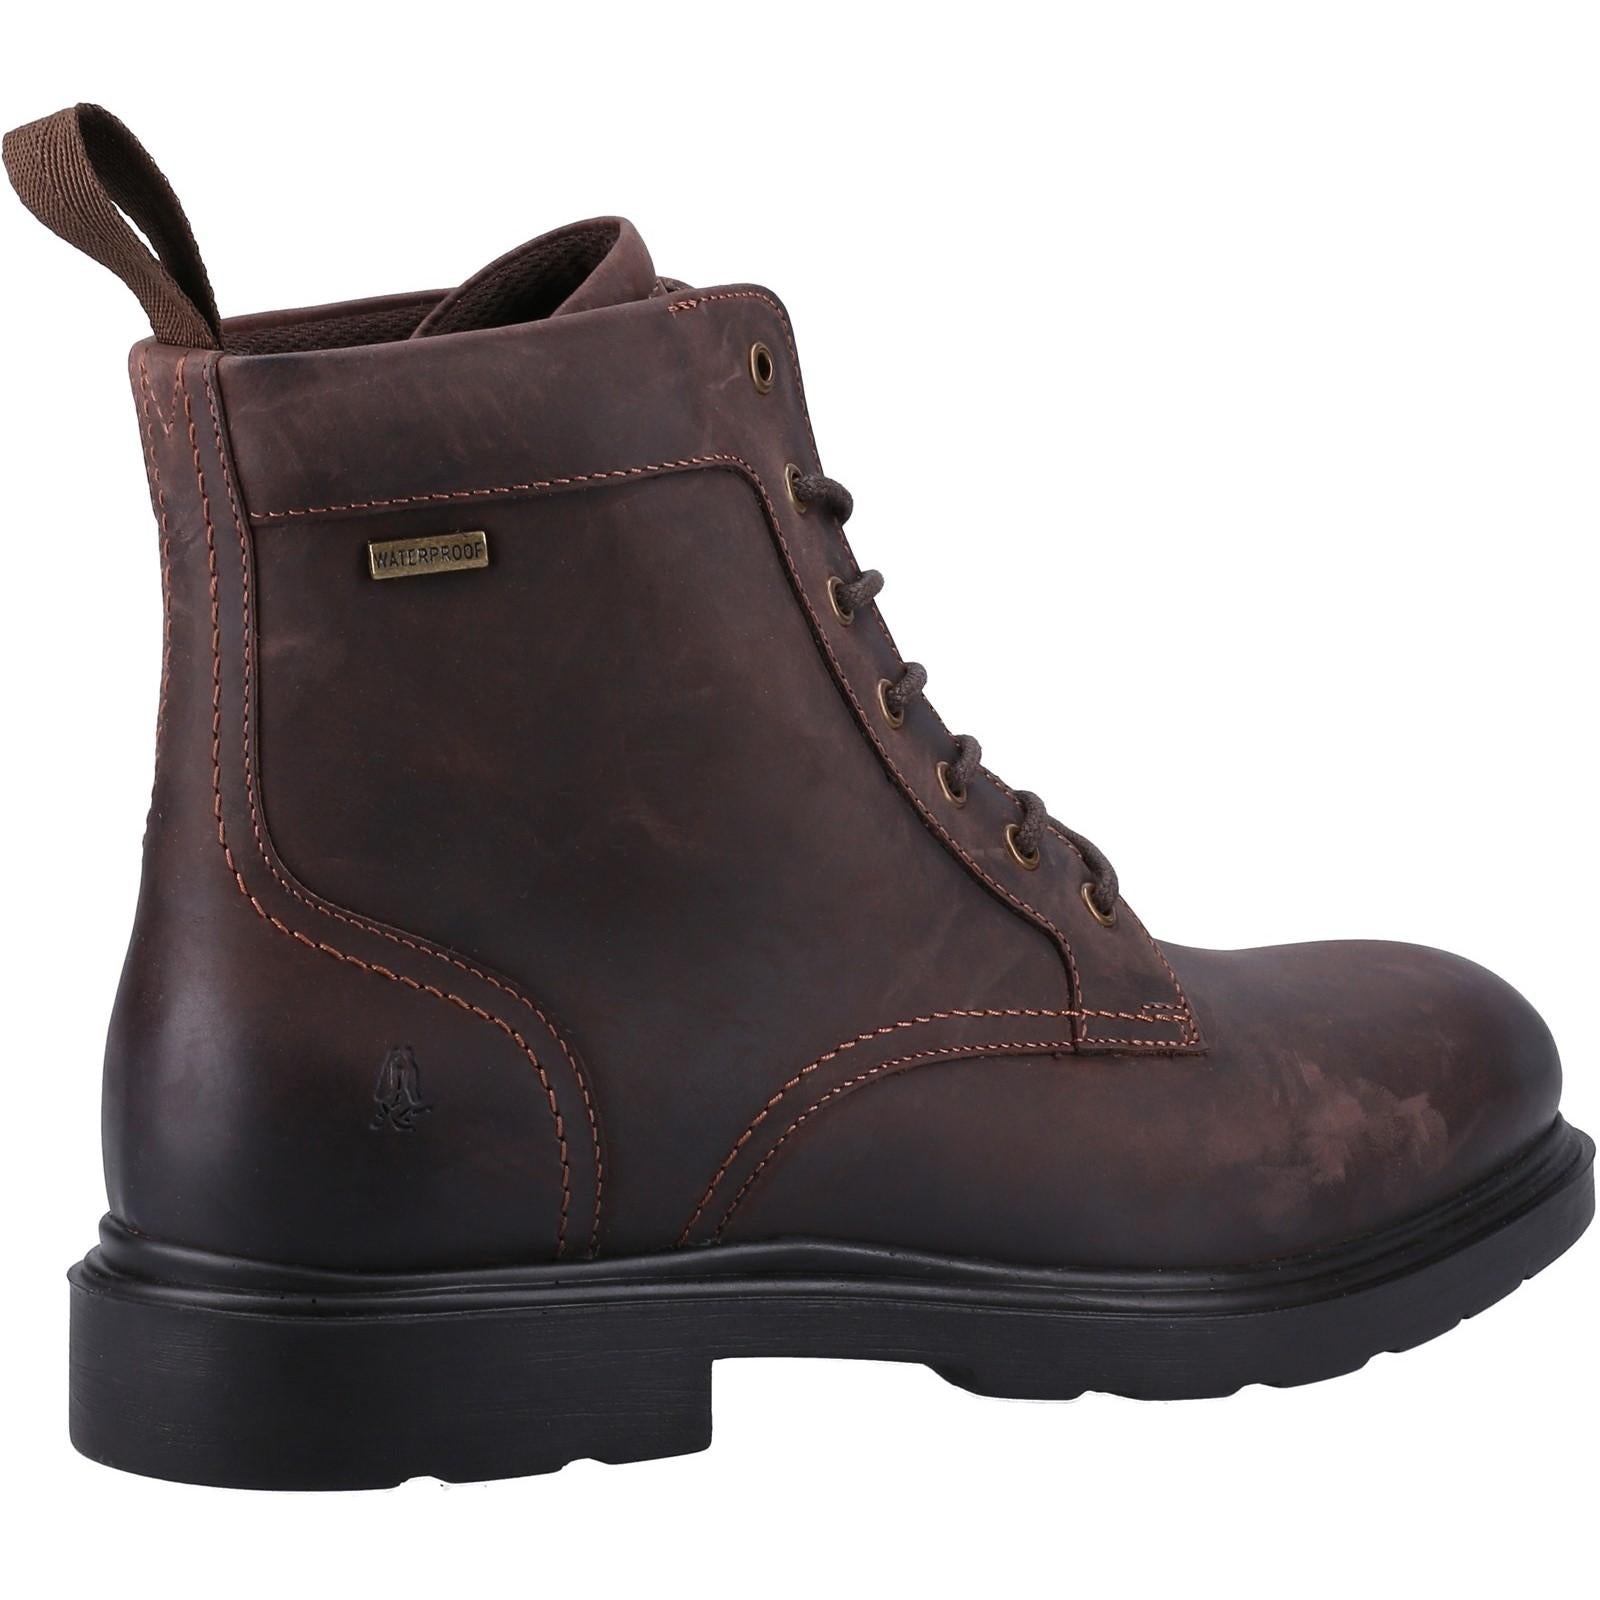 Hush Puppies Porter Lace Boot